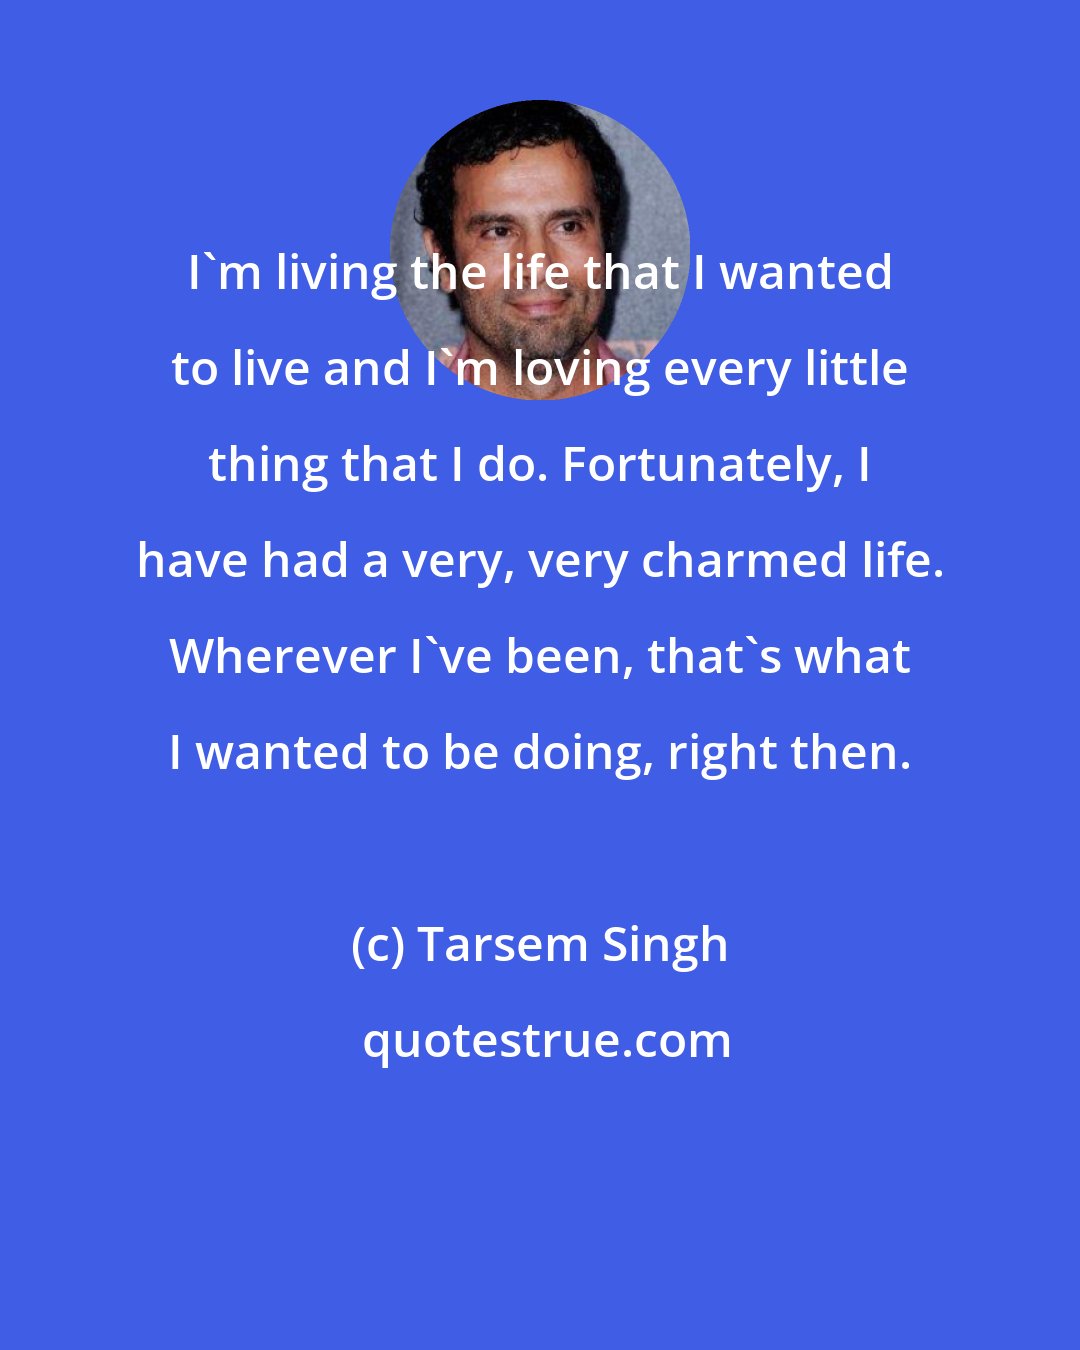 Tarsem Singh: I'm living the life that I wanted to live and I'm loving every little thing that I do. Fortunately, I have had a very, very charmed life. Wherever I've been, that's what I wanted to be doing, right then.